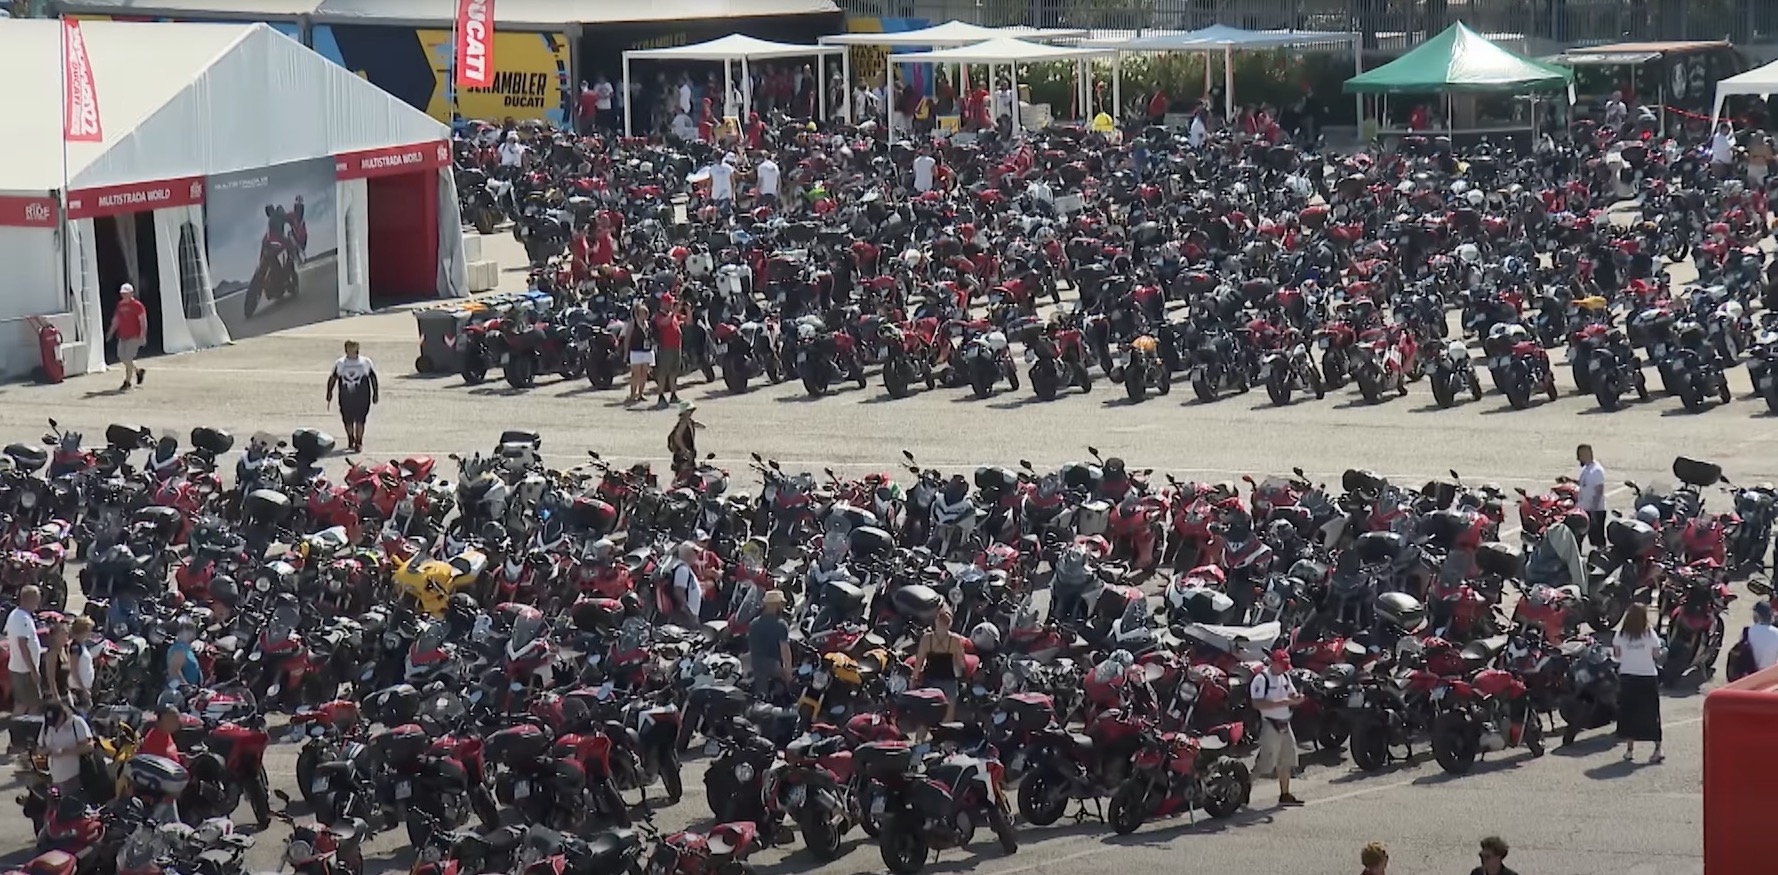 Ducati's 2022 Island Experience; an exclusive access event to all the best of what Team Red offers. Media sourced from Simon Crafer's Youtube video recount of the event.